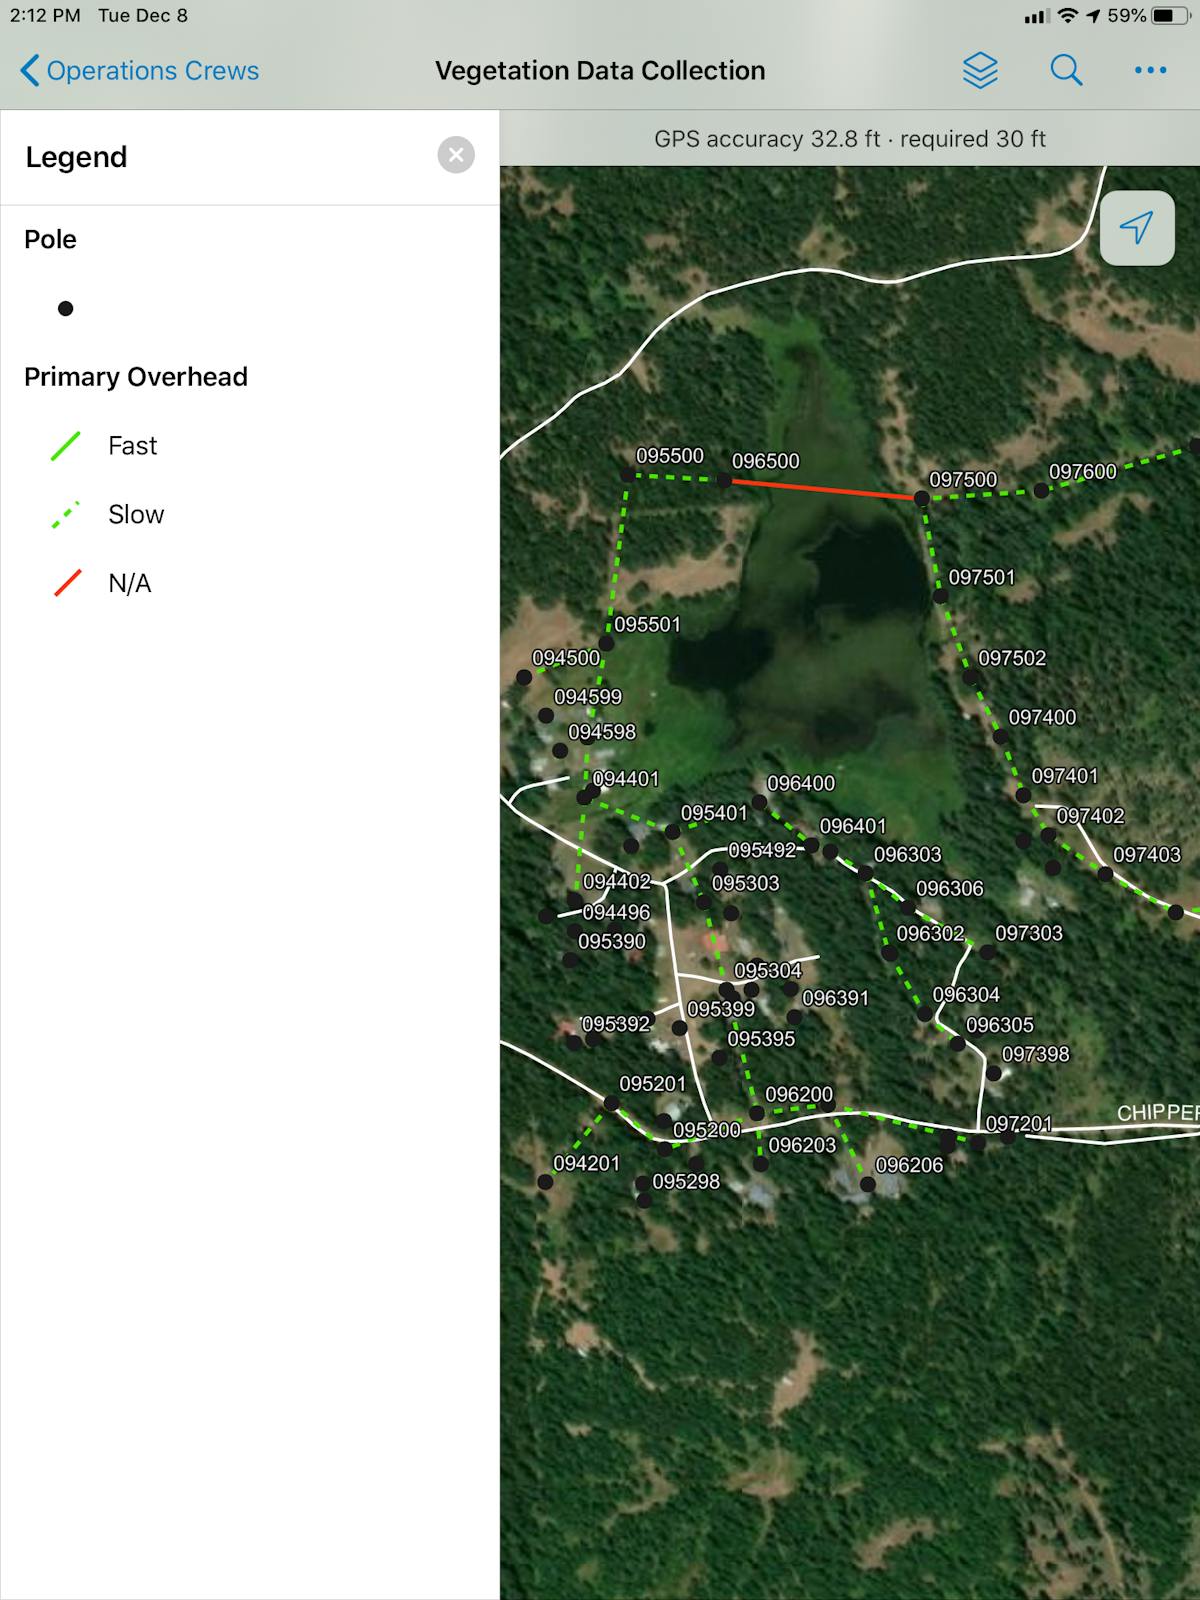 Dusty Grogan, operations superintendent, uses Esri&apos;s ArcGIS Collector to tag conductors that may have fast or slow growing vegetation nearby.